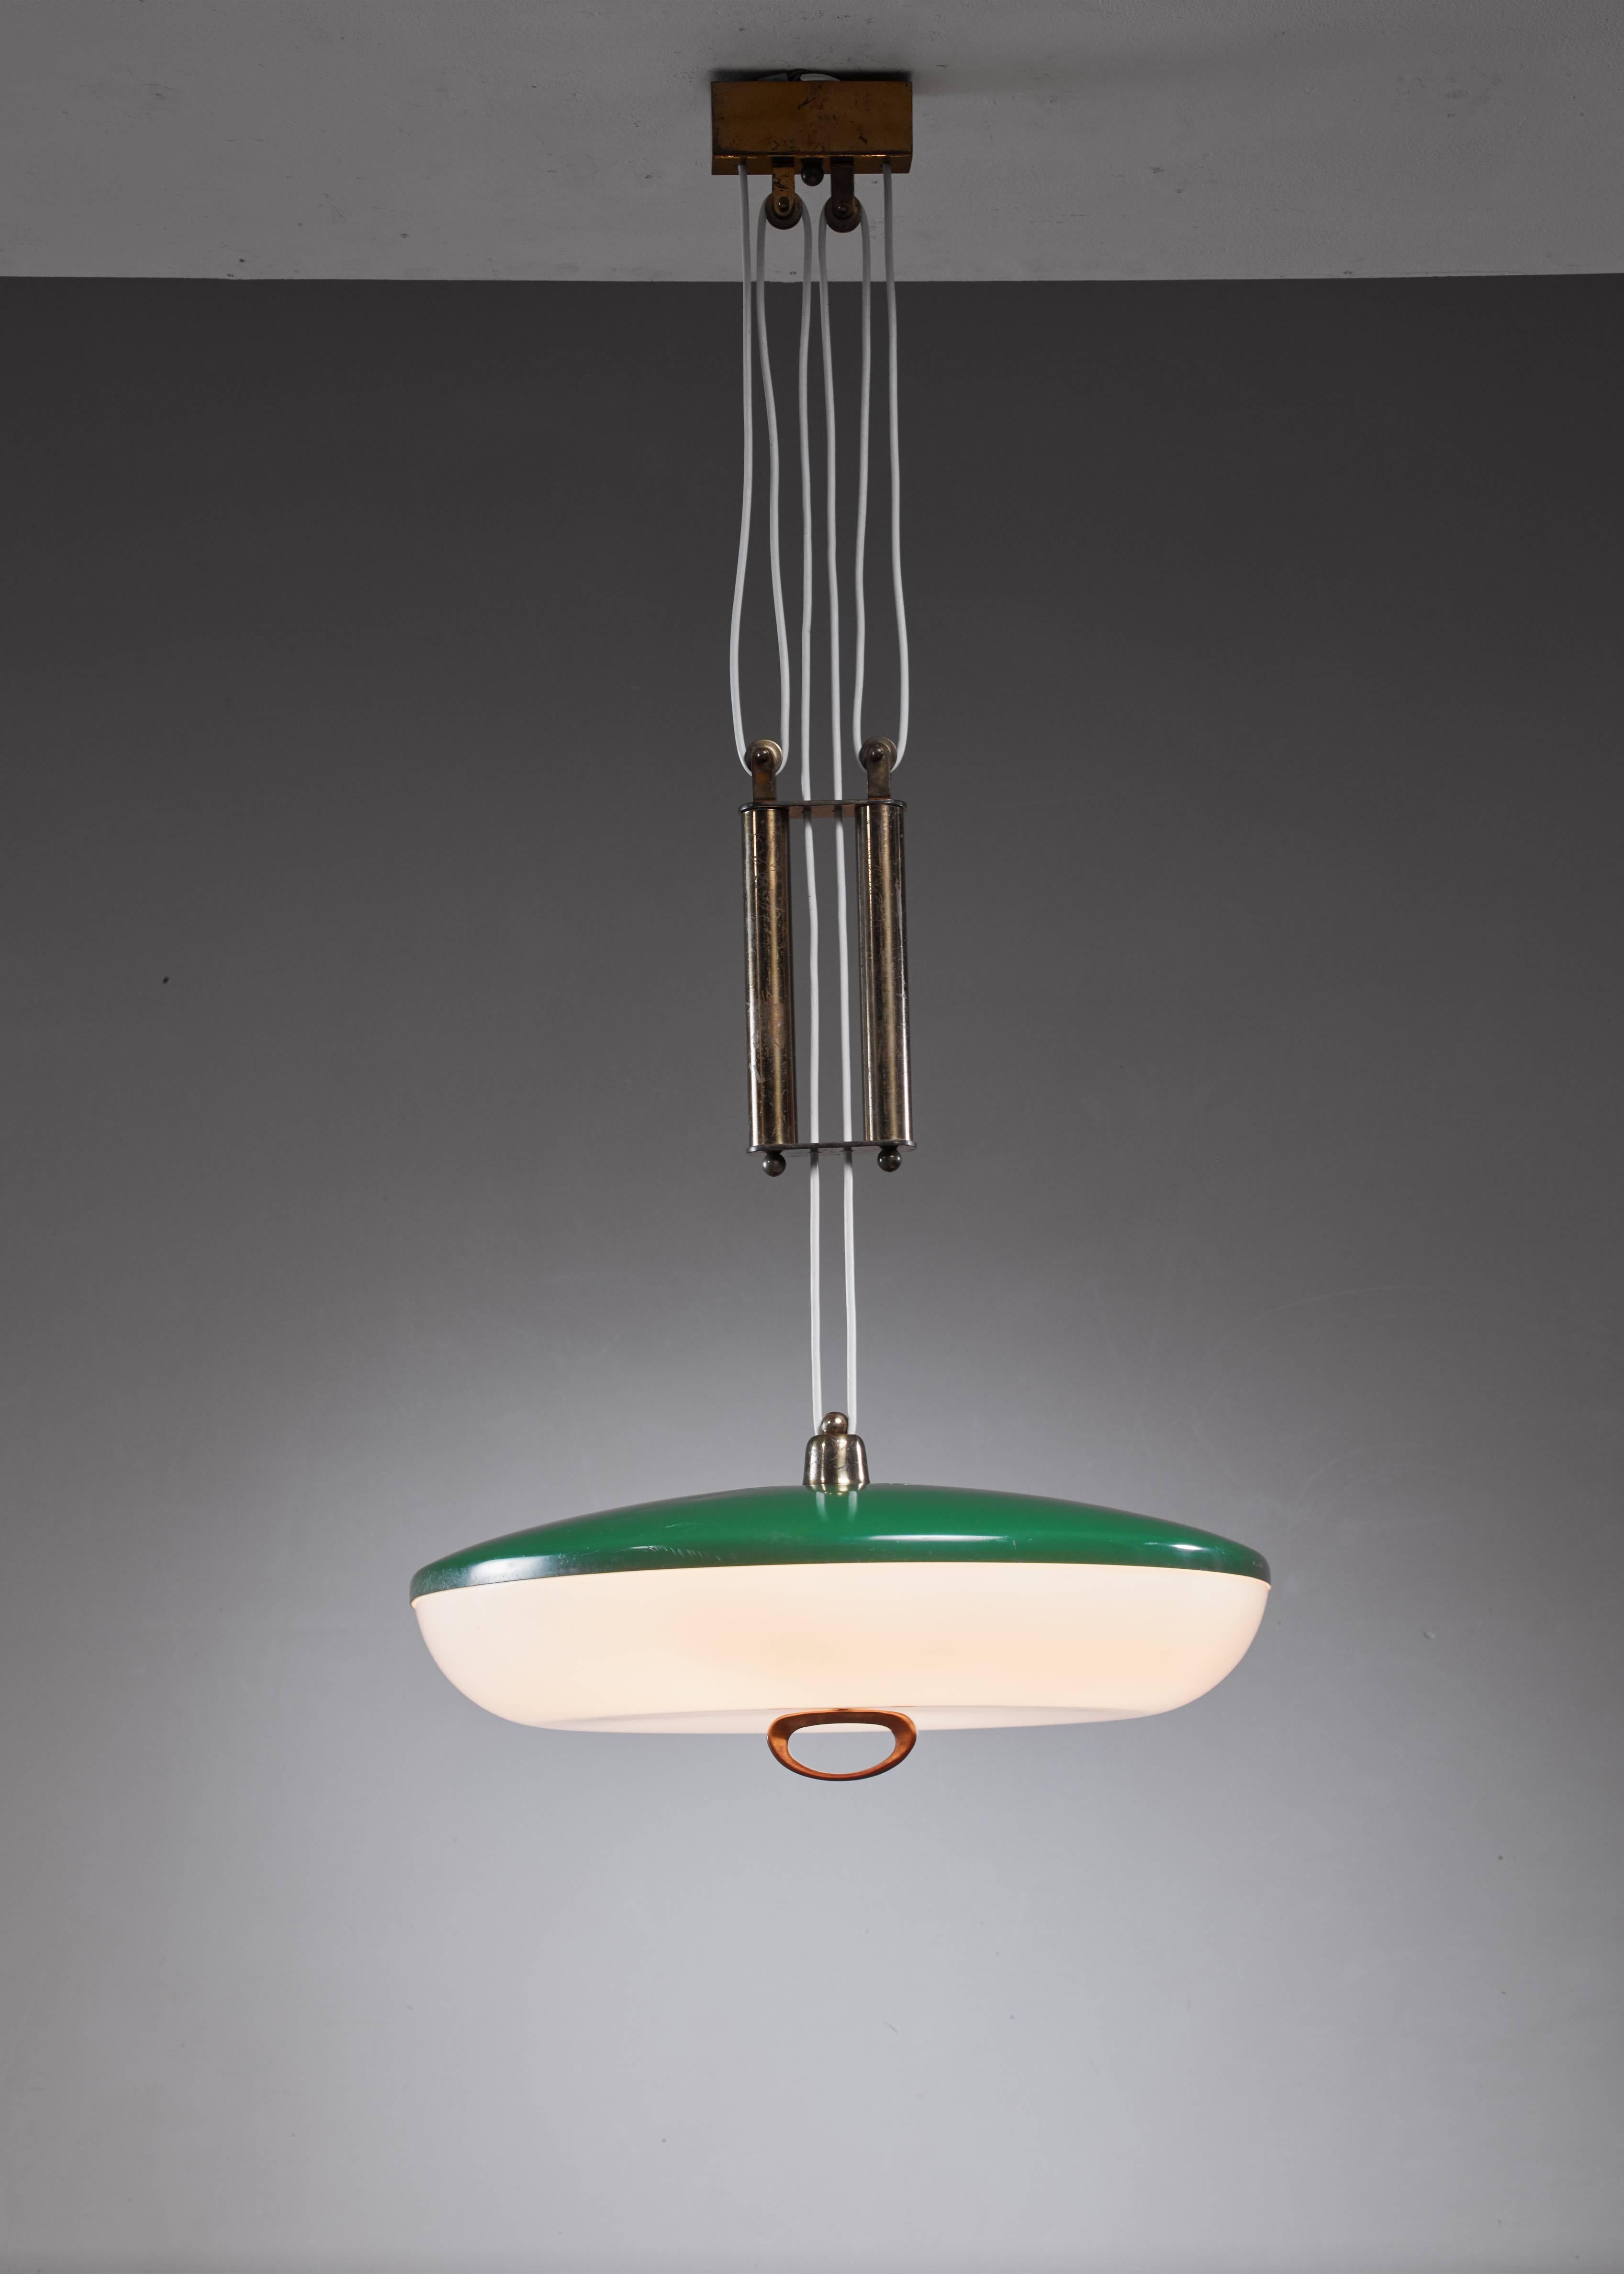 A 1950s Sciolari for Stilnovo pill shaped pendant made of a green lacquered metal shade with a plexiglass diffuser. The lamp is height-adjustable by means of the brass pull and the beautiful double counterweight also in brass.

 